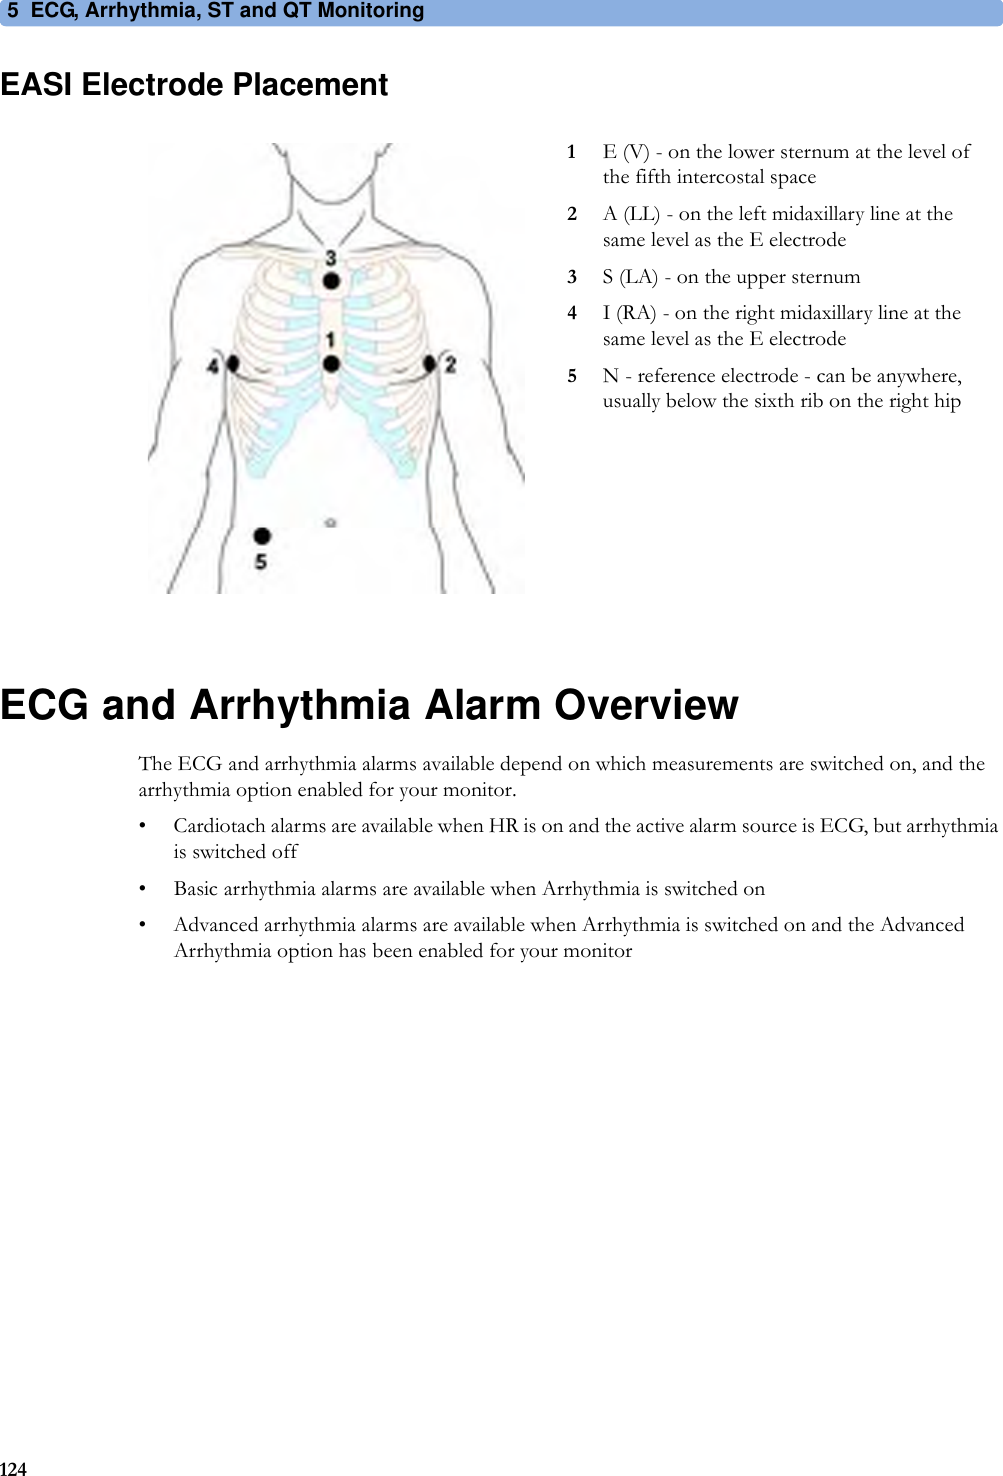 5 ECG, Arrhythmia, ST and QT Monitoring124EASI Electrode PlacementECG and Arrhythmia Alarm OverviewThe ECG and arrhythmia alarms available depend on which measurements are switched on, and the arrhythmia option enabled for your monitor.• Cardiotach alarms are available when HR is on and the active alarm source is ECG, but arrhythmia is switched off• Basic arrhythmia alarms are available when Arrhythmia is switched on• Advanced arrhythmia alarms are available when Arrhythmia is switched on and the Advanced Arrhythmia option has been enabled for your monitor1E (V) - on the lower sternum at the level of the fifth intercostal space2A (LL) - on the left midaxillary line at the same level as the E electrode3S (LA) - on the upper sternum4I (RA) - on the right midaxillary line at the same level as the E electrode5N - reference electrode - can be anywhere, usually below the sixth rib on the right hip